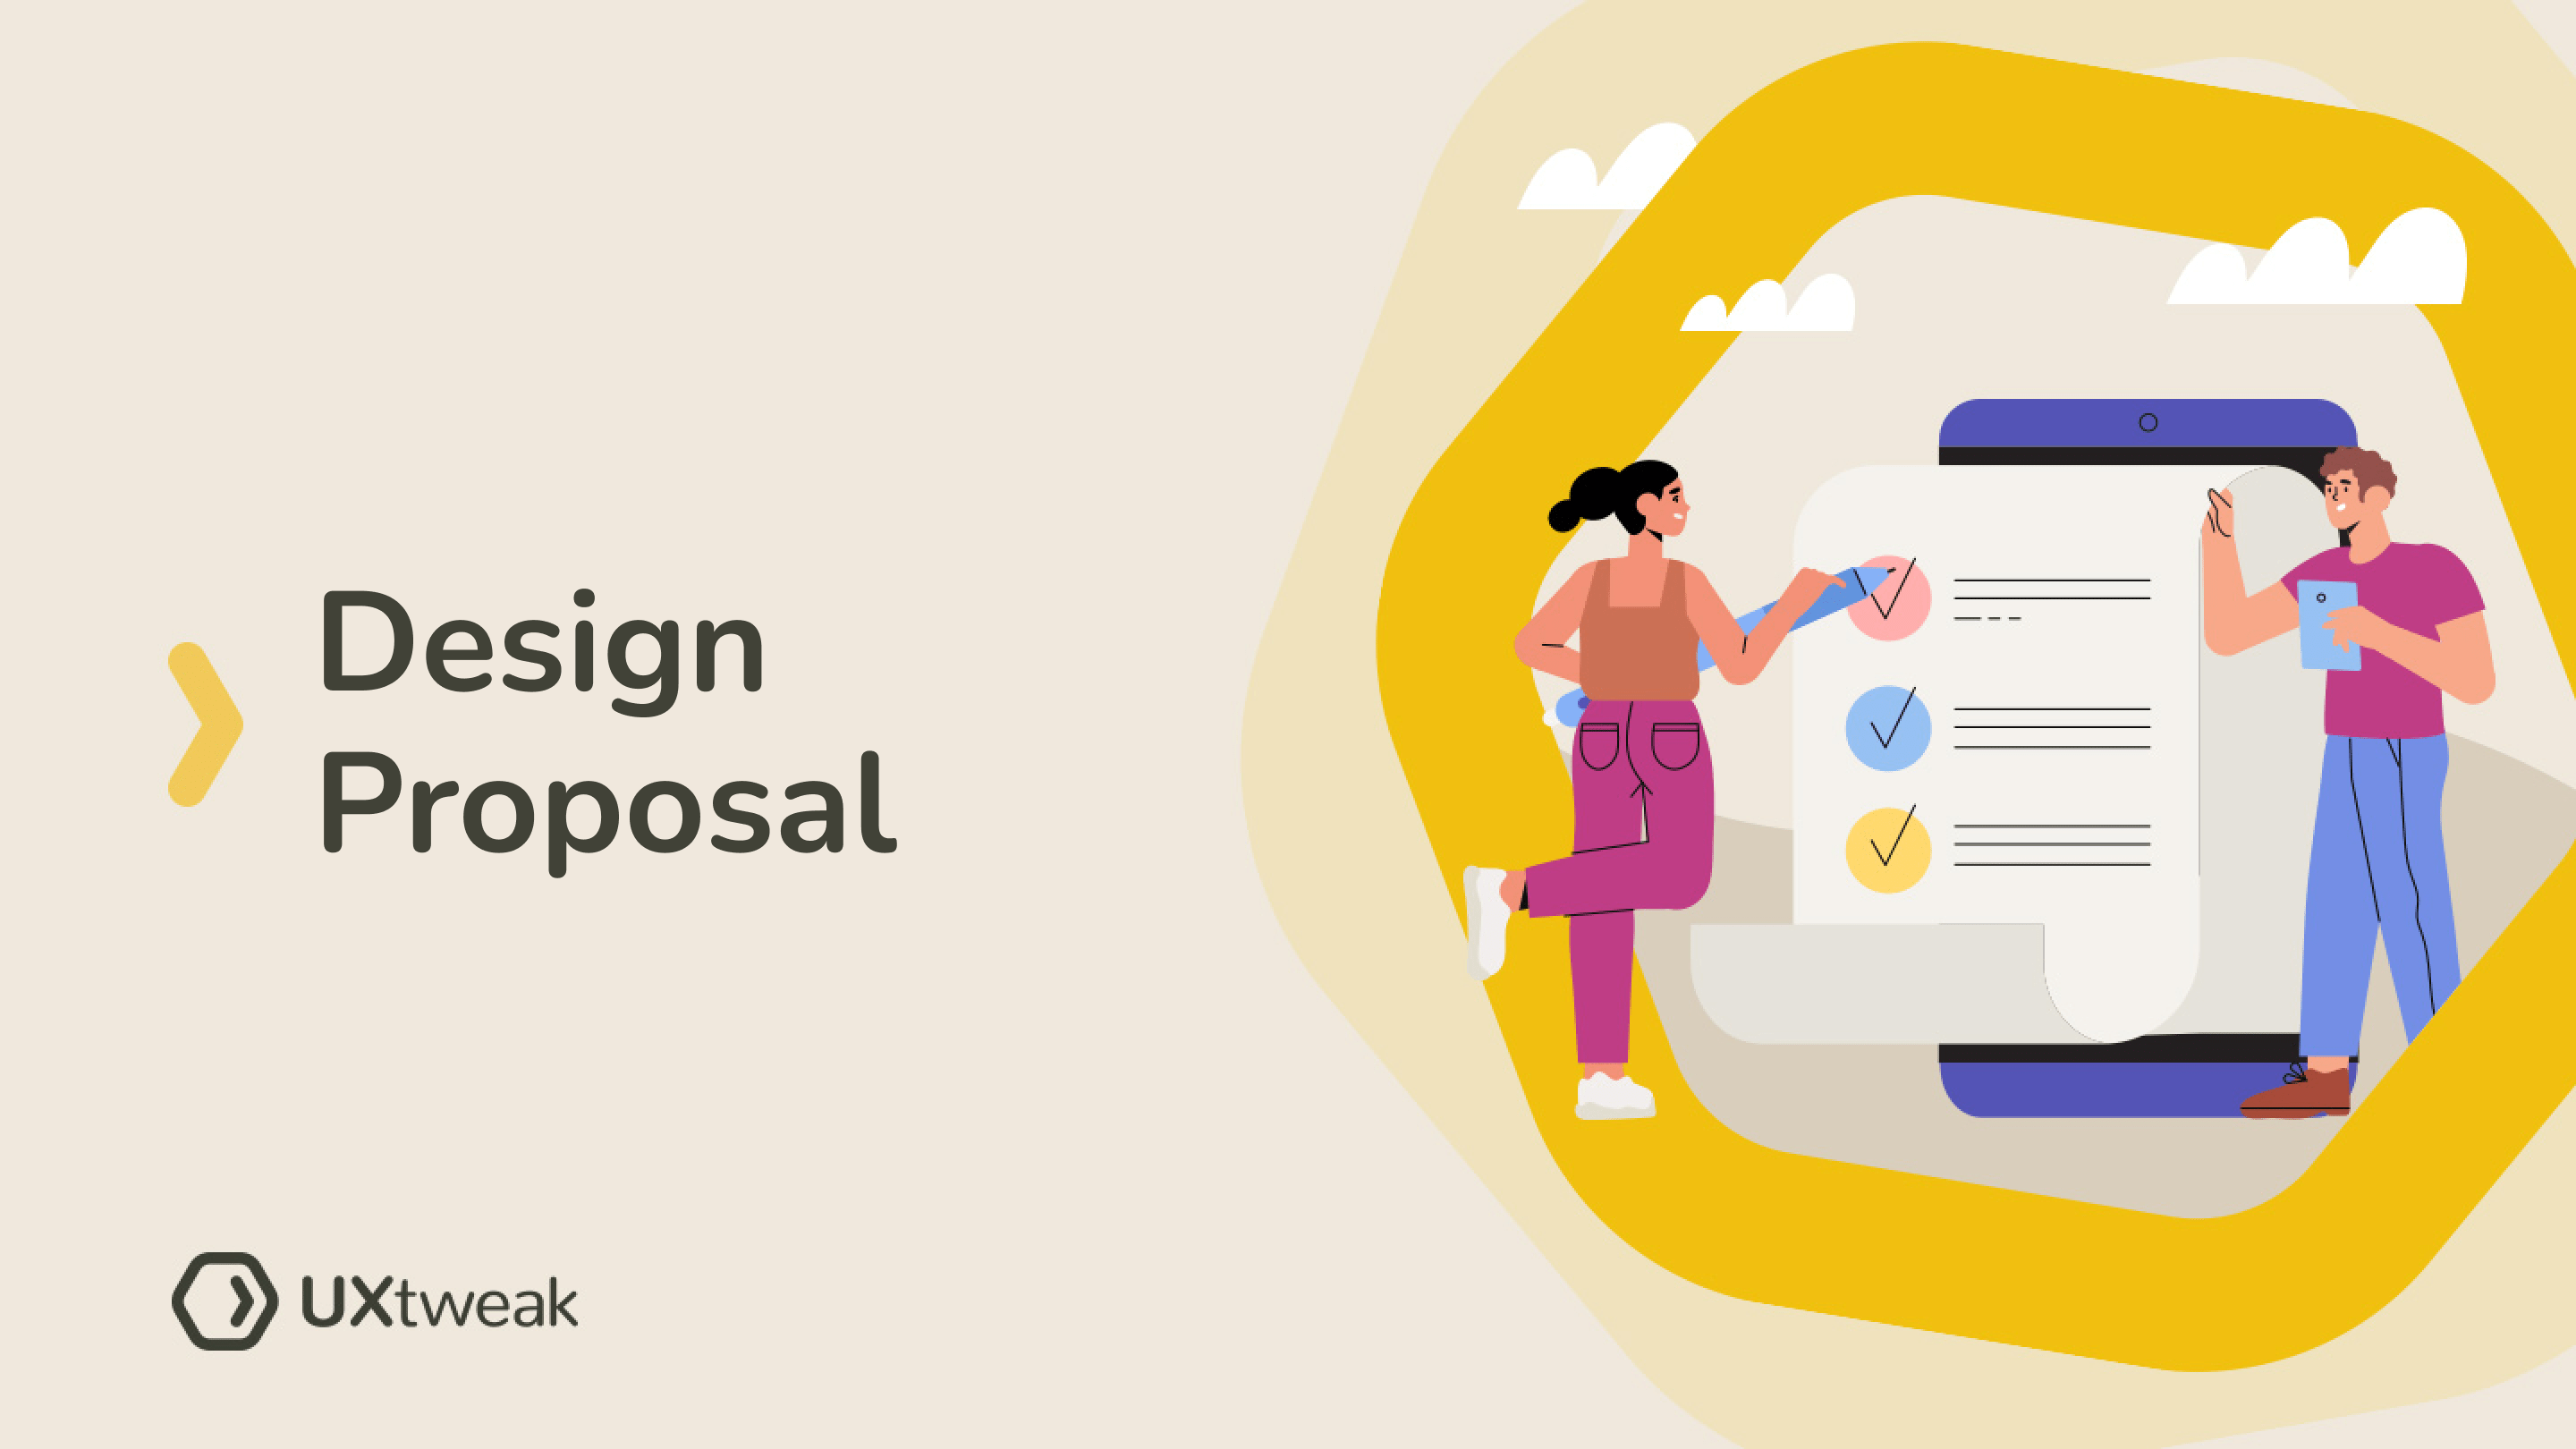 How to Craft a Leading Design Proposal with User Research